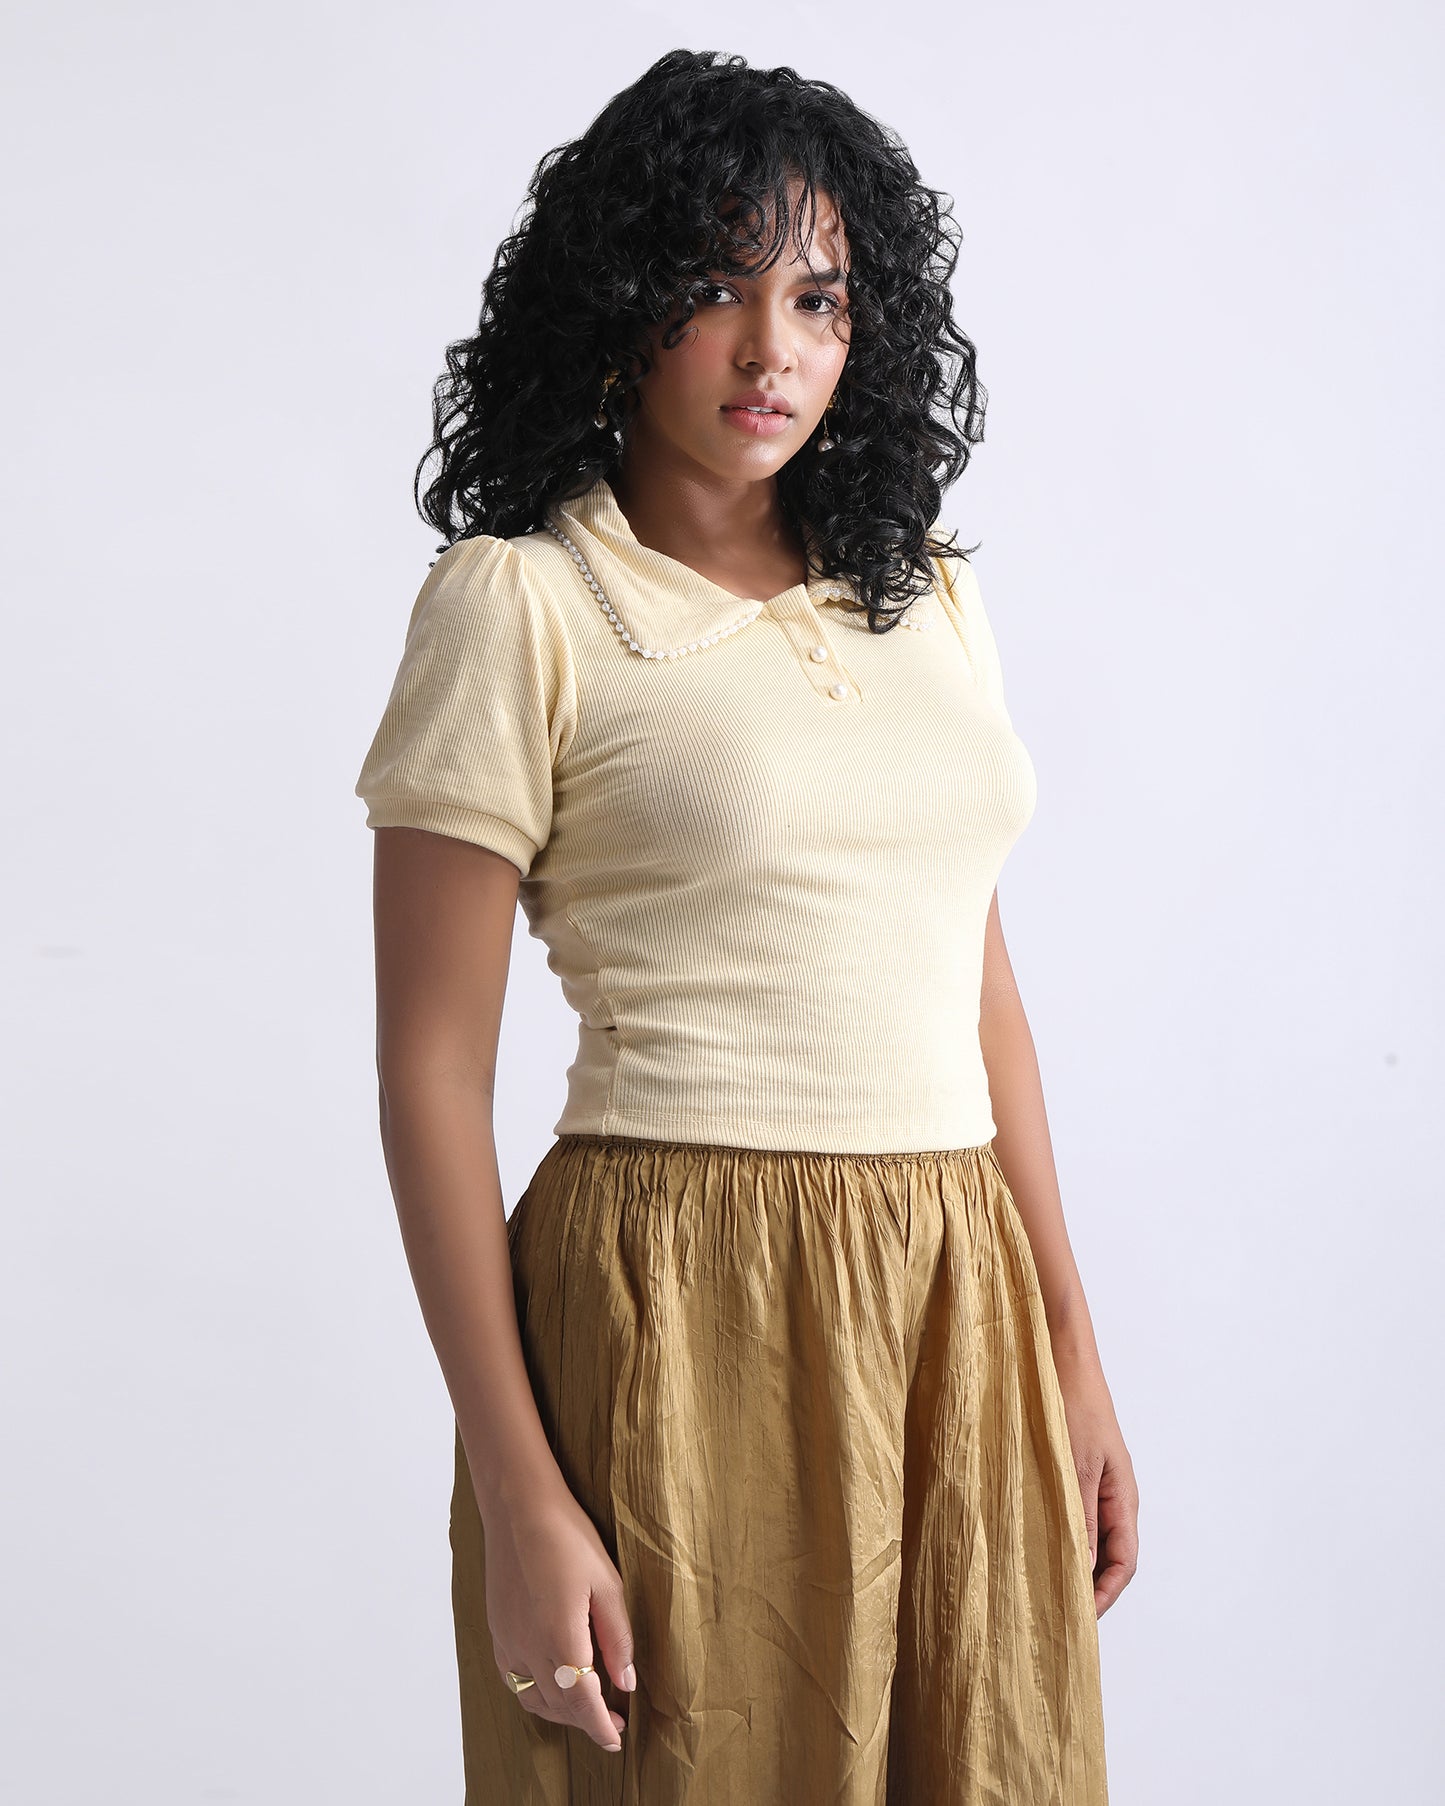 BEADED COLLARED TOP,beaded, beige, collared, crop, peter pan collar, relaxed fit, short sleeves, top, topwear,beaded-relaxed-fit-top-beige,Neck - Collared neckSleeve - Short sleevesFit - Relaxed fitPrint/Pattern - SolidColor - BeigeMaterial - RibbedDetail - Beaded neck detail